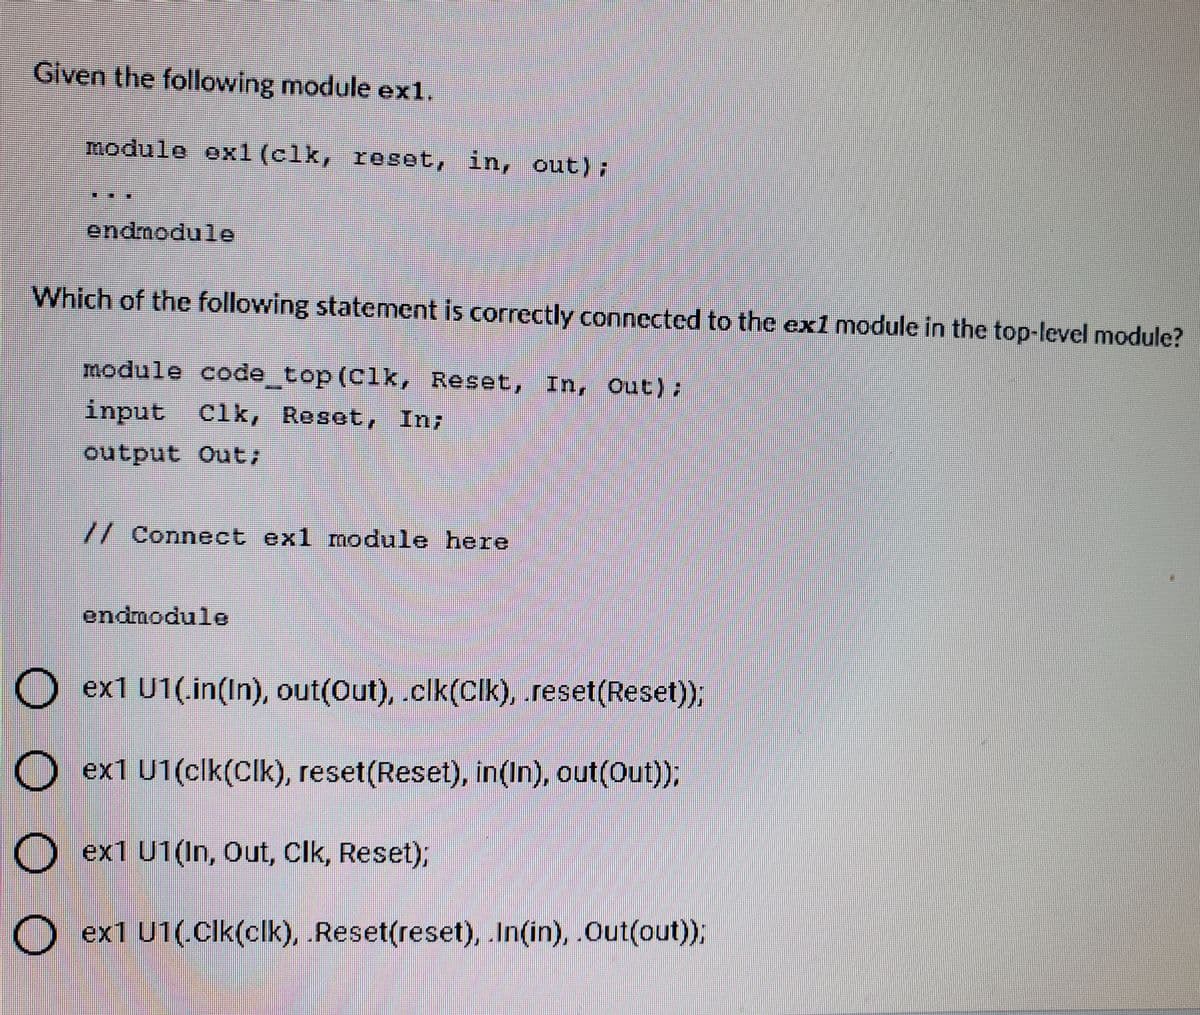 Given the following module exl.
module ex1 (clk, reset, in, out);
endmodule
Which of the following statement is correctly conncctcd to the ex1 module in the top-level module?
module code top (Clk, Reset, In, Out);
input Clk, Reset, In;
output Out;
//Connect exl module here
endmodule
Dex1 U1(.in(In), out(Out), .clk(Clk), reset(Reset),
O ex1 U1(clk(Clk), reset(Reset), in(In), out(Out);
O ex1 U1(In, Out, Clk, Reset);
O ex1 U1(.Cik(clk), Reset(reset), In(in), Out(out));
OO O O
